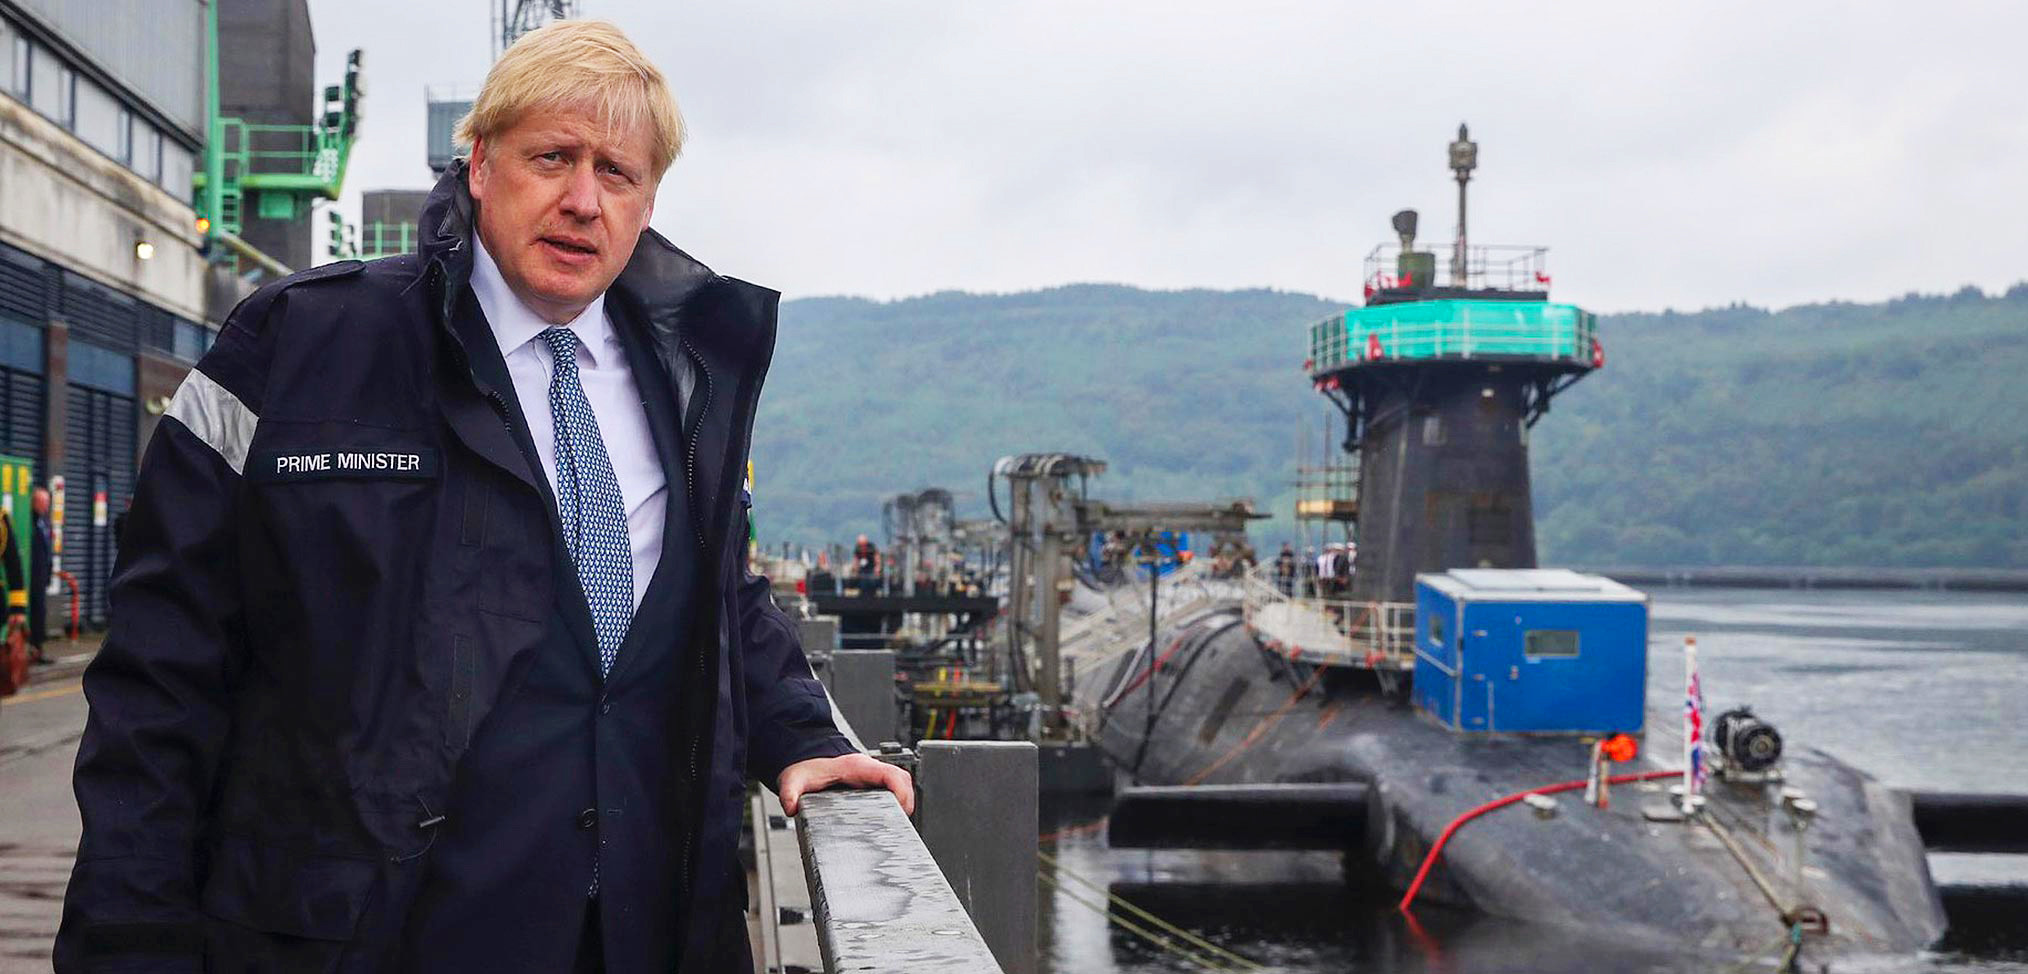 Election 2019: In search of the Royal Navy’s political friends